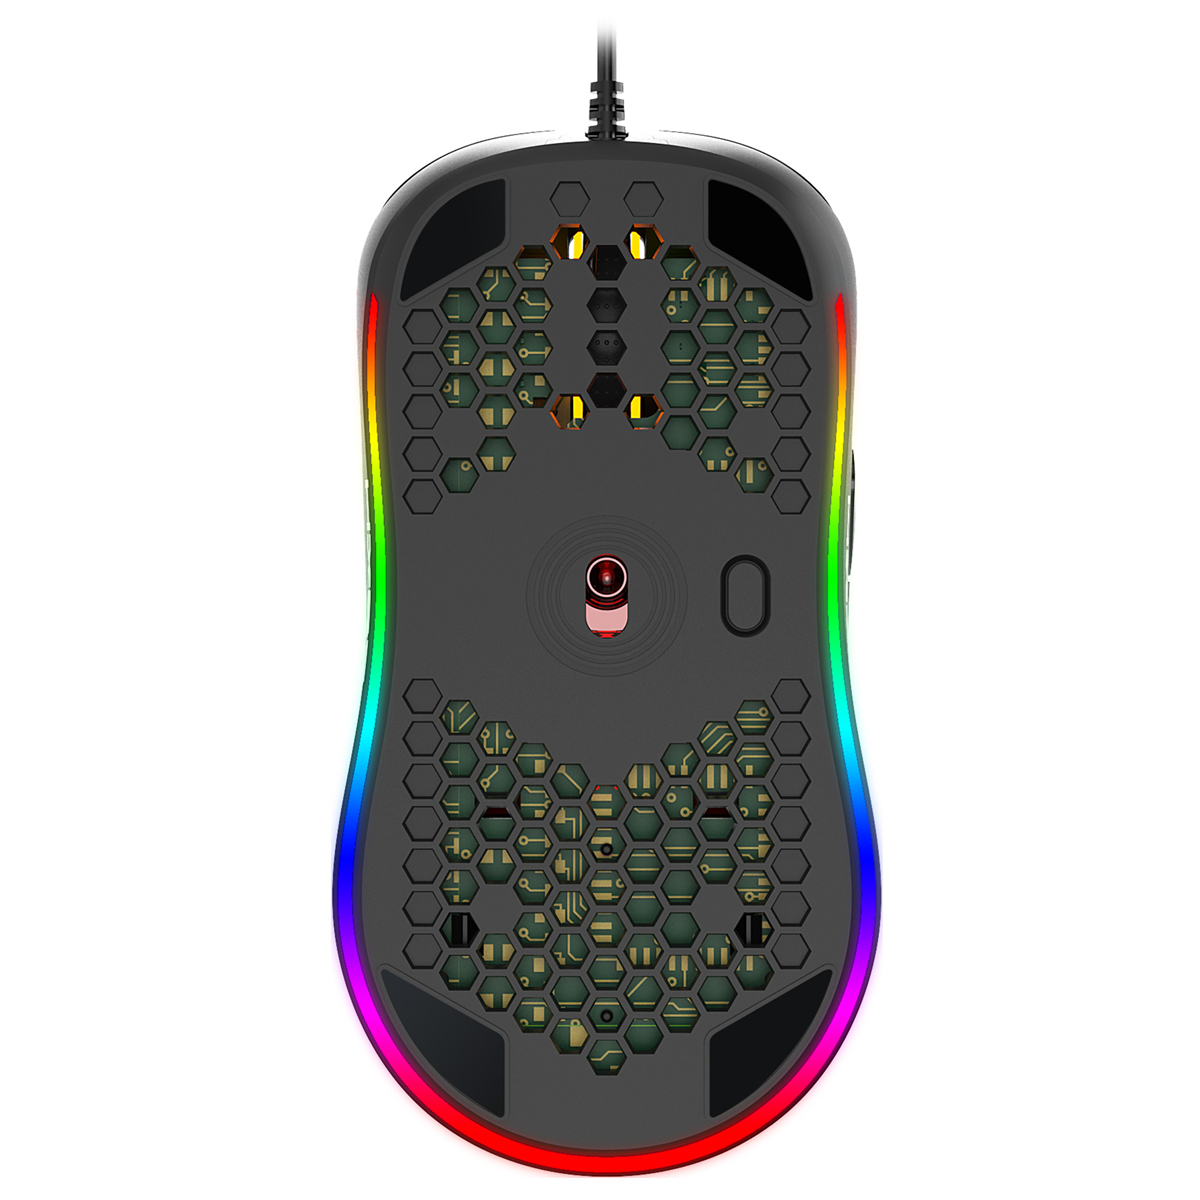 HXSJ X600 Wired Gaming Mouse RGB Backlight Hollow Honeycomb Shape 6400DPI Macro Programming Home Office Gamer Mice for Desktop Computer Laptop PC